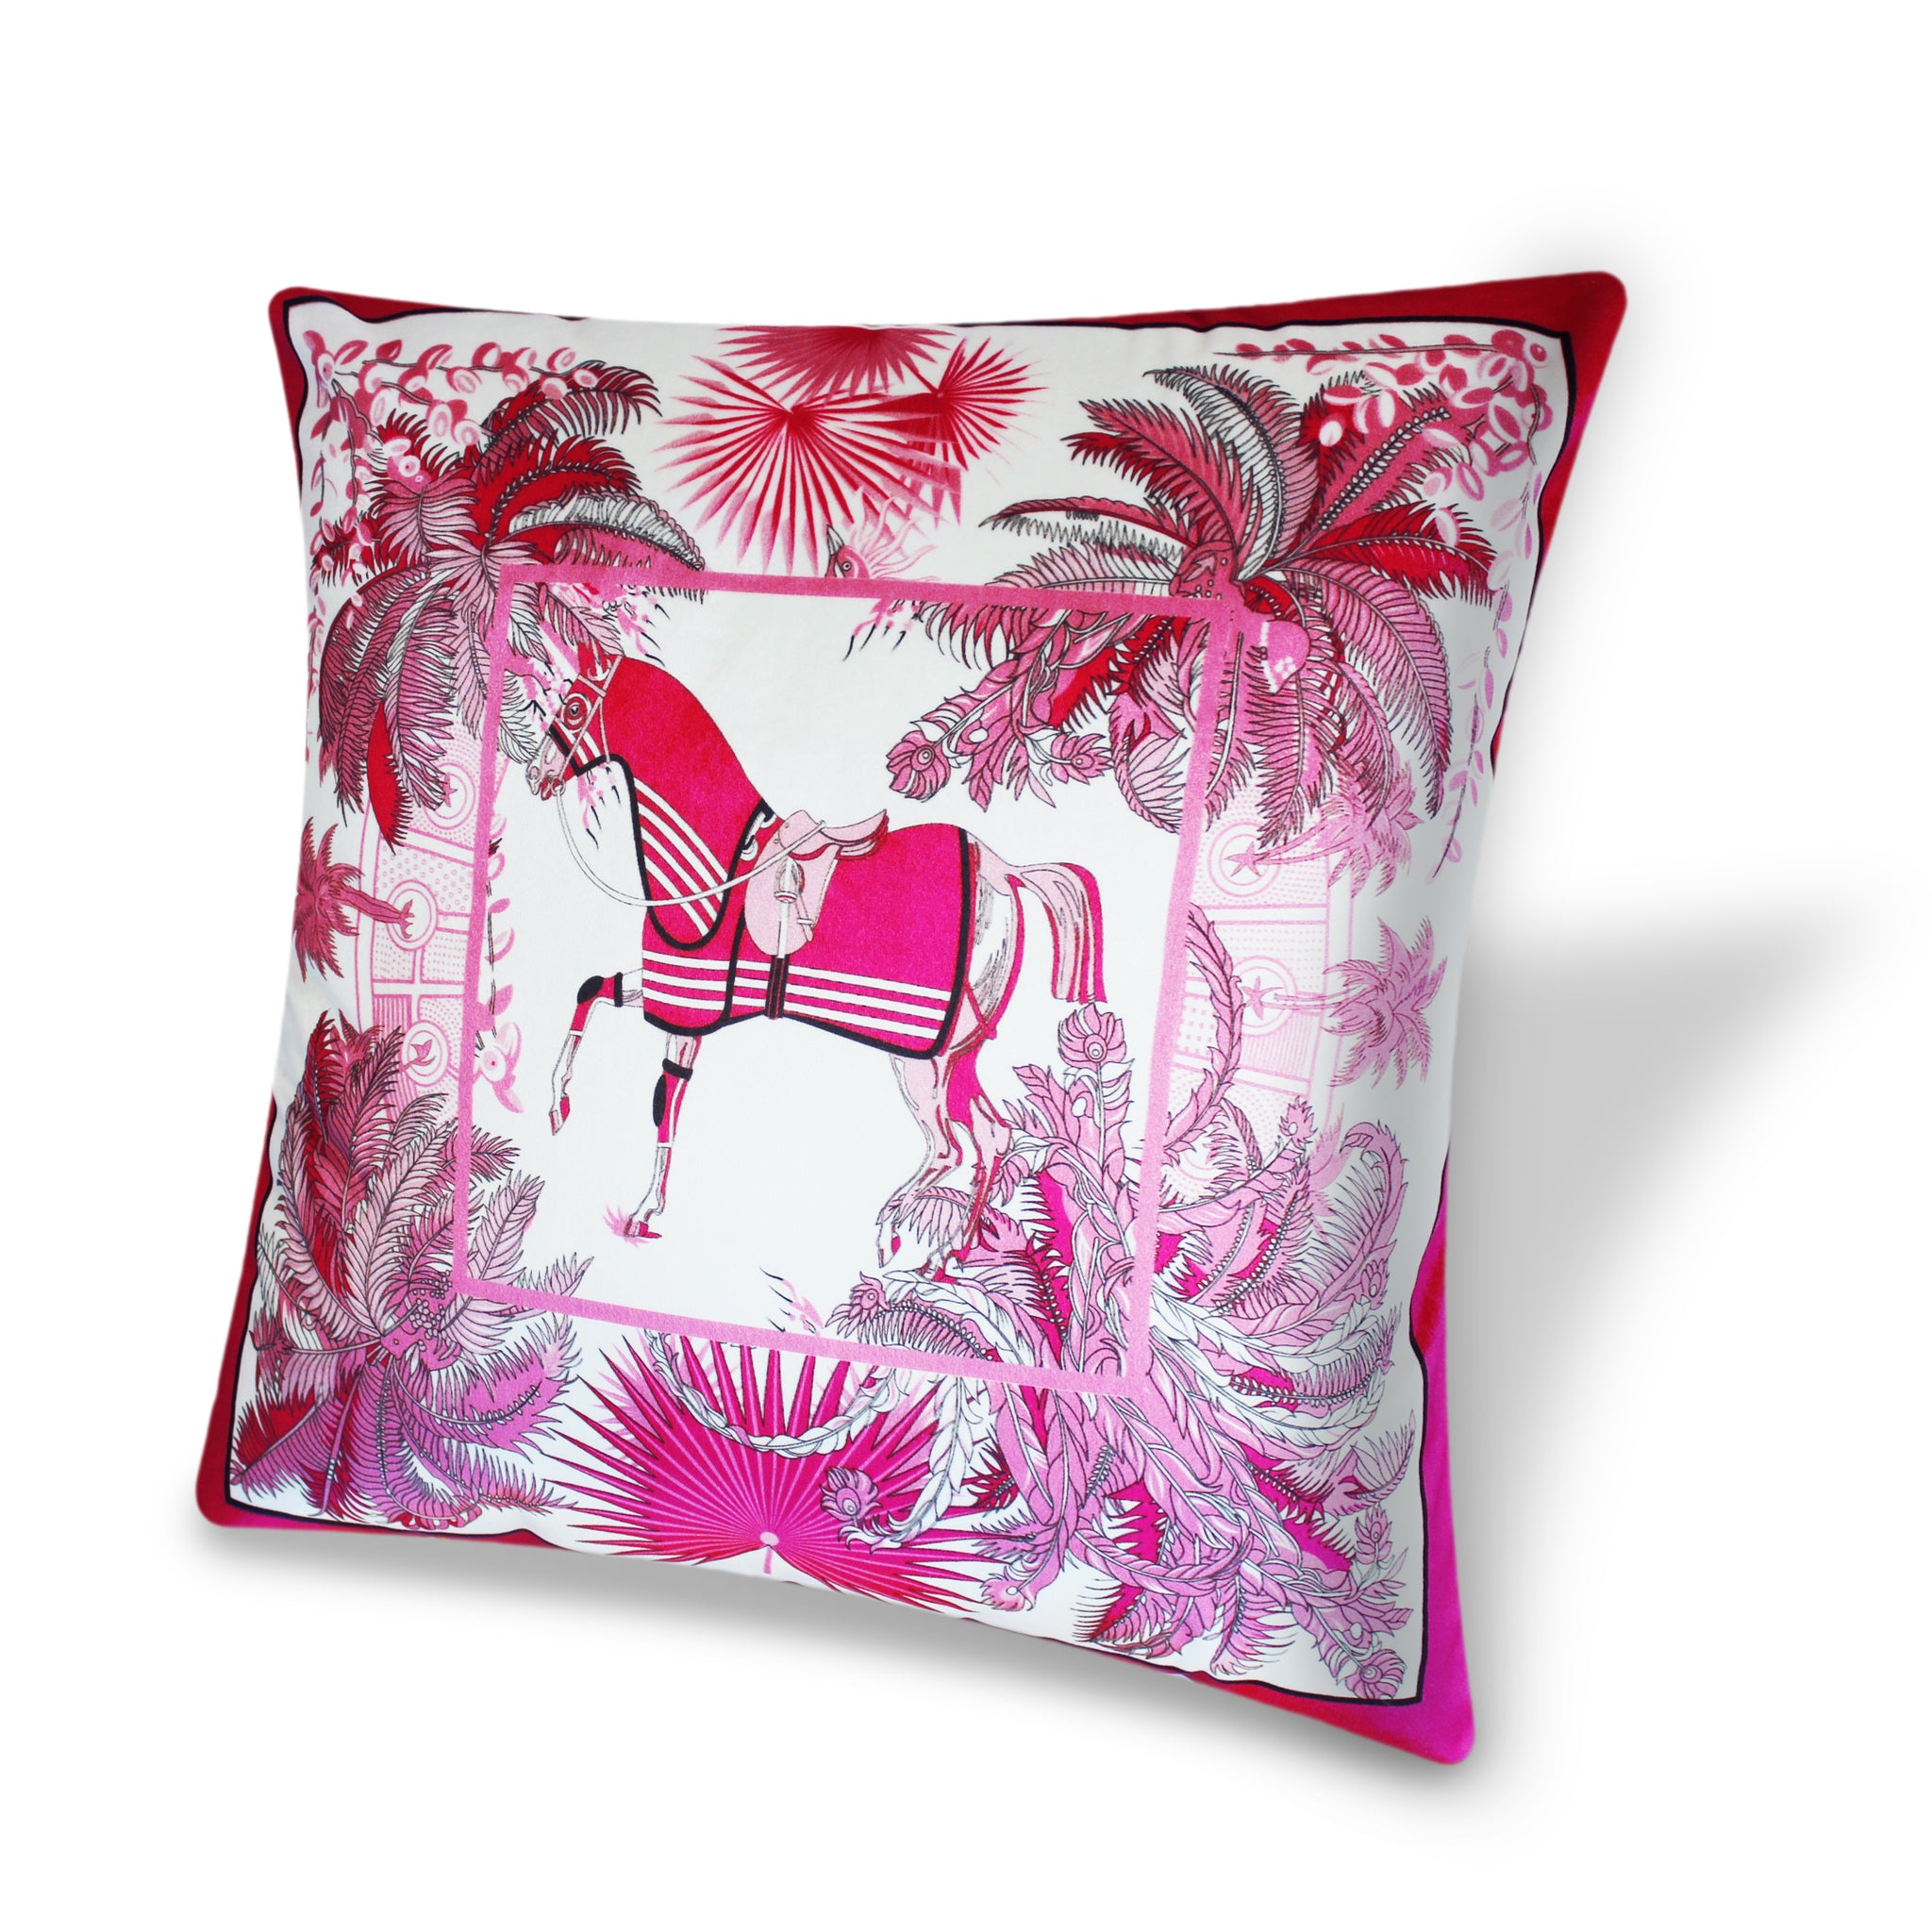 Pink Velvet Cushion Cover, Hermes Inspired Horse Printed Decorative Pillow, Vintage Home Décor Throw Pillow Cover,  45 x 45 CM